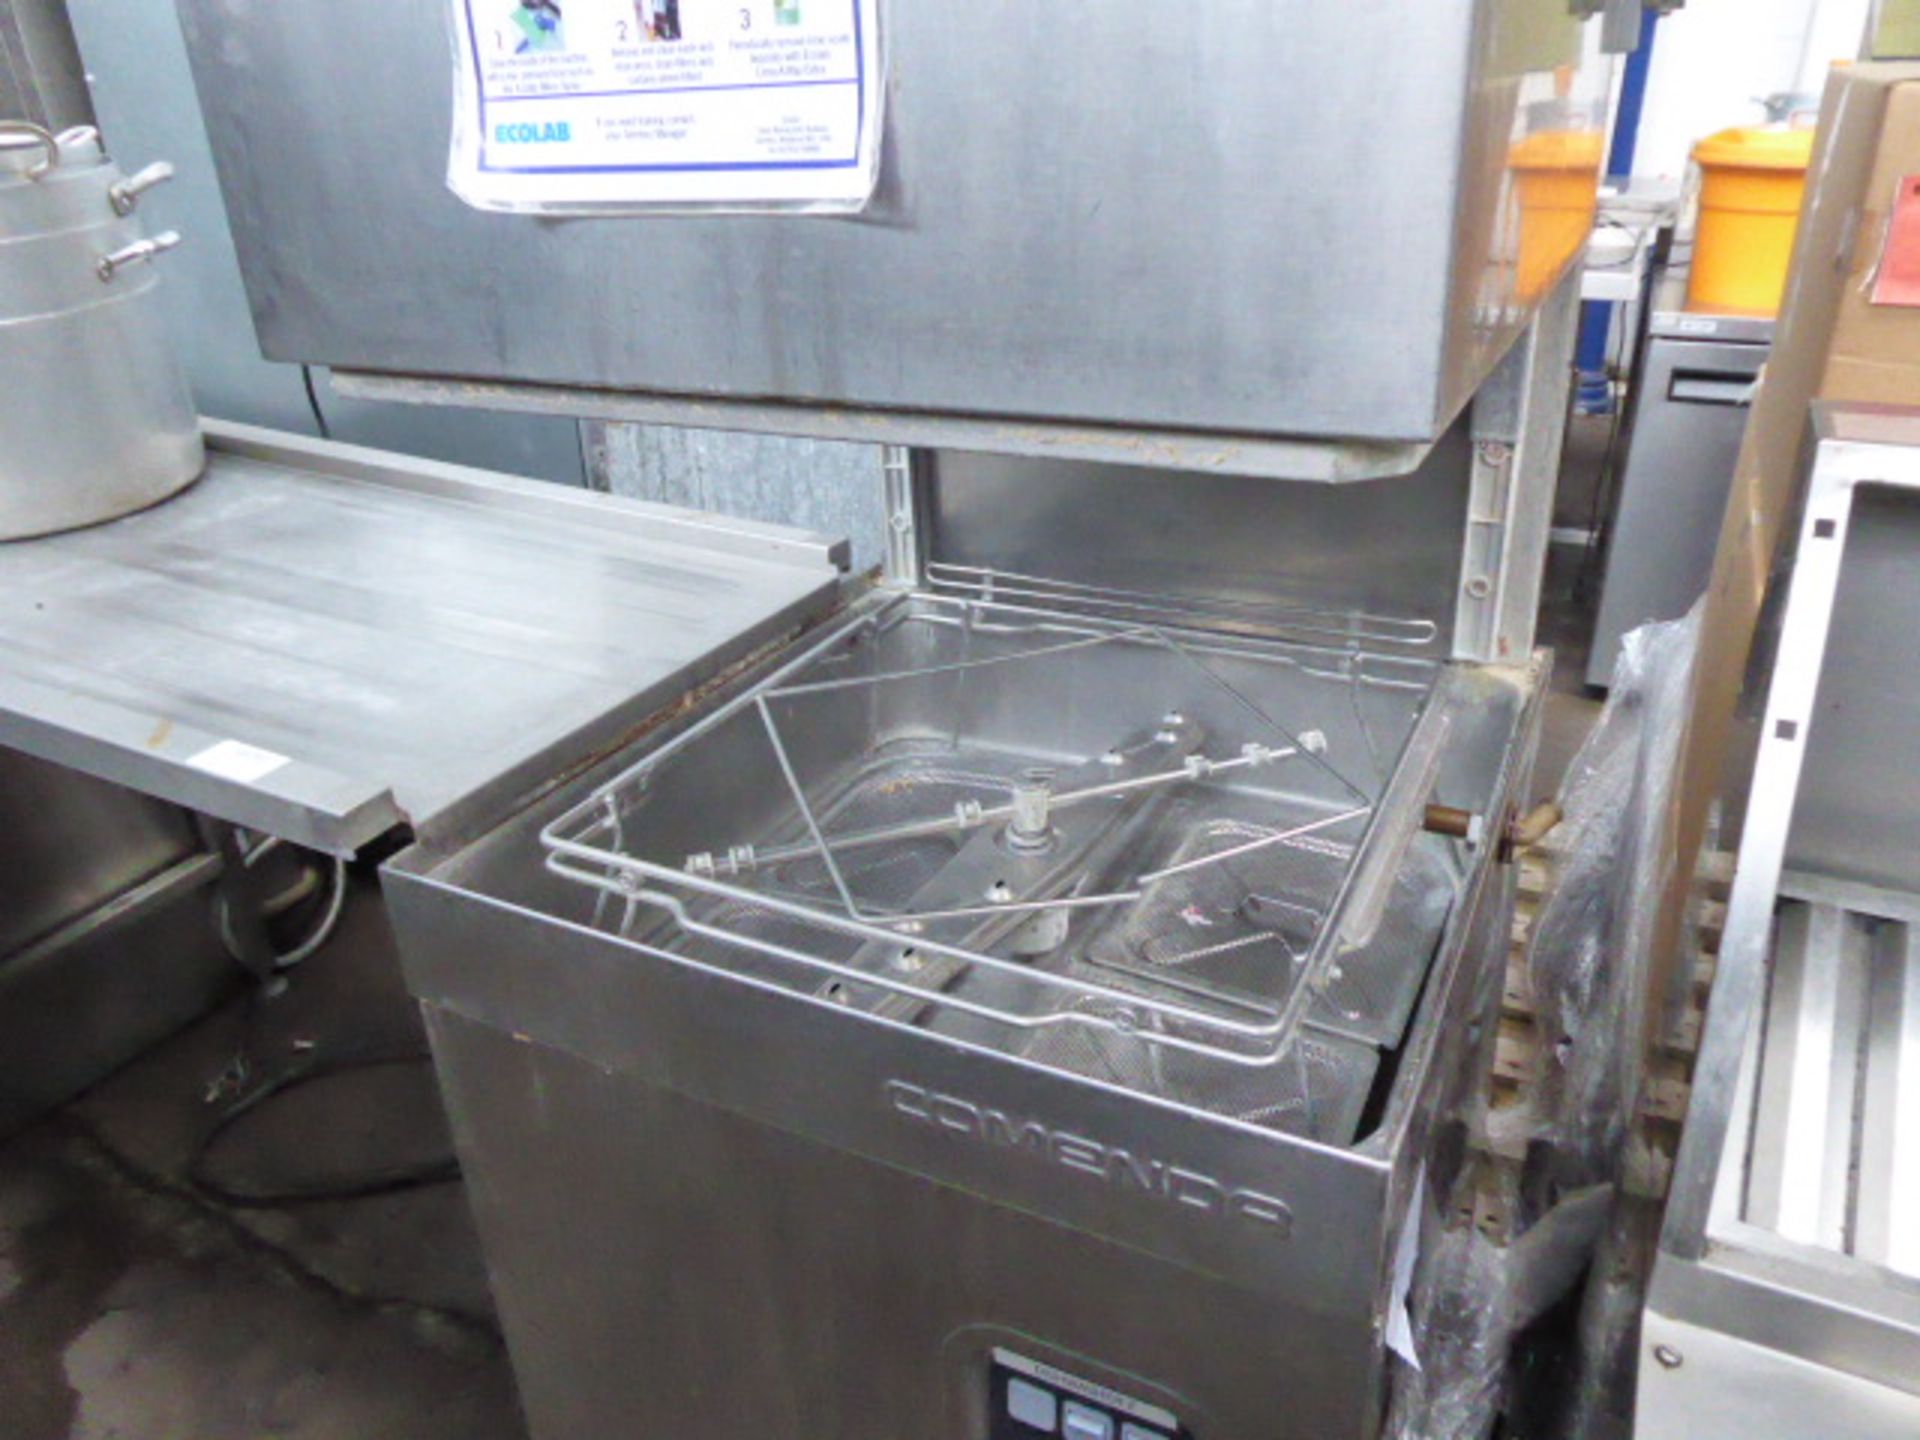 60cm Comenda lift top pass through dishwasher with associated draining board - Image 2 of 2